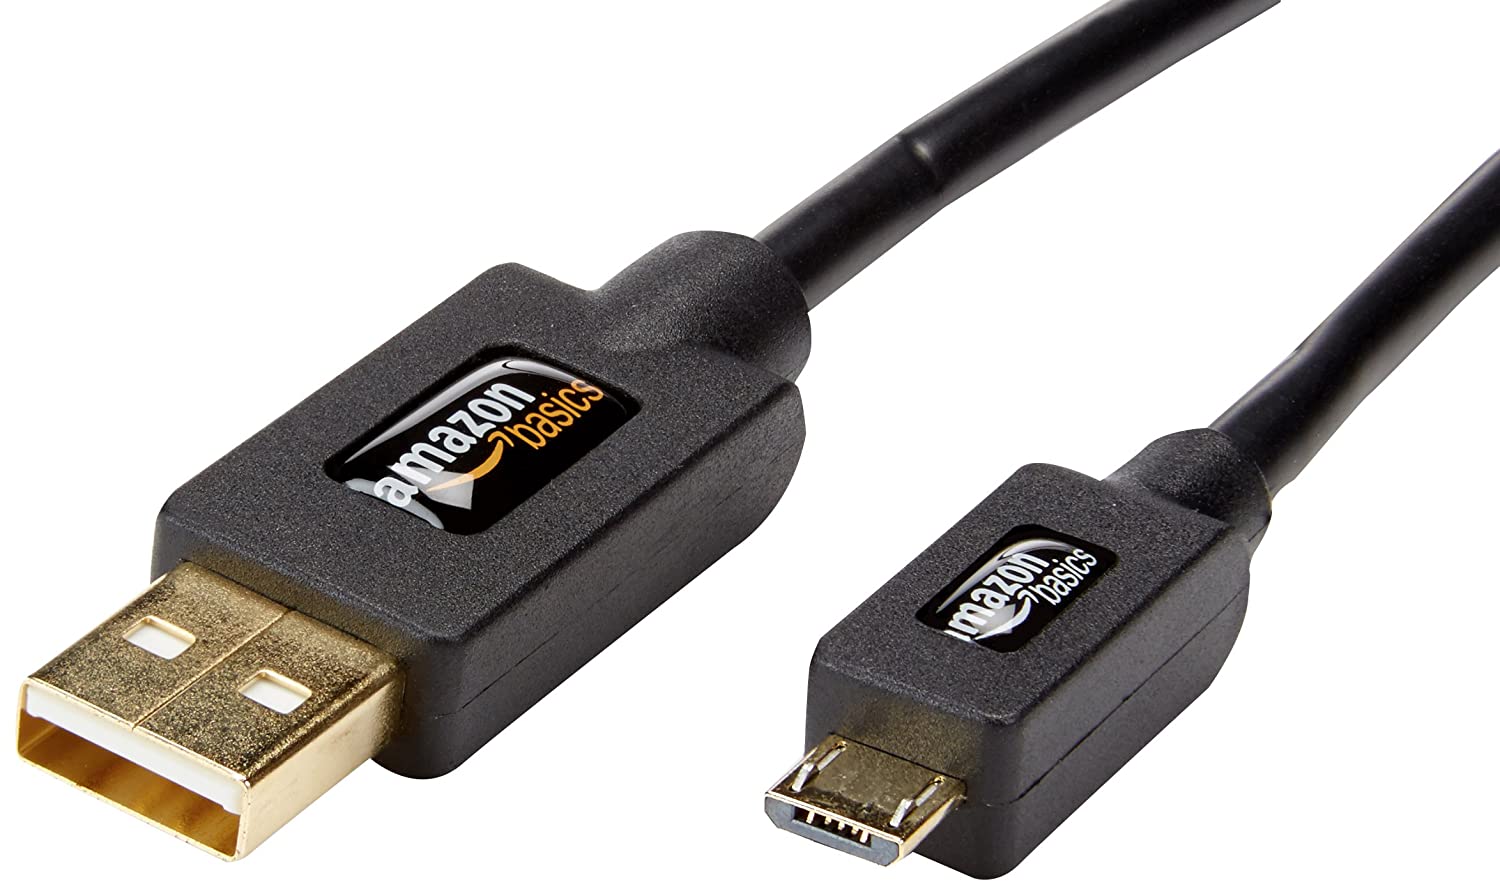 Basics USB-A to Micro USB Fast Charging Cable, 480Mbps Transfer  Speed with Gold-Plated Plugs, USB 2.0, 3 Foot, Black